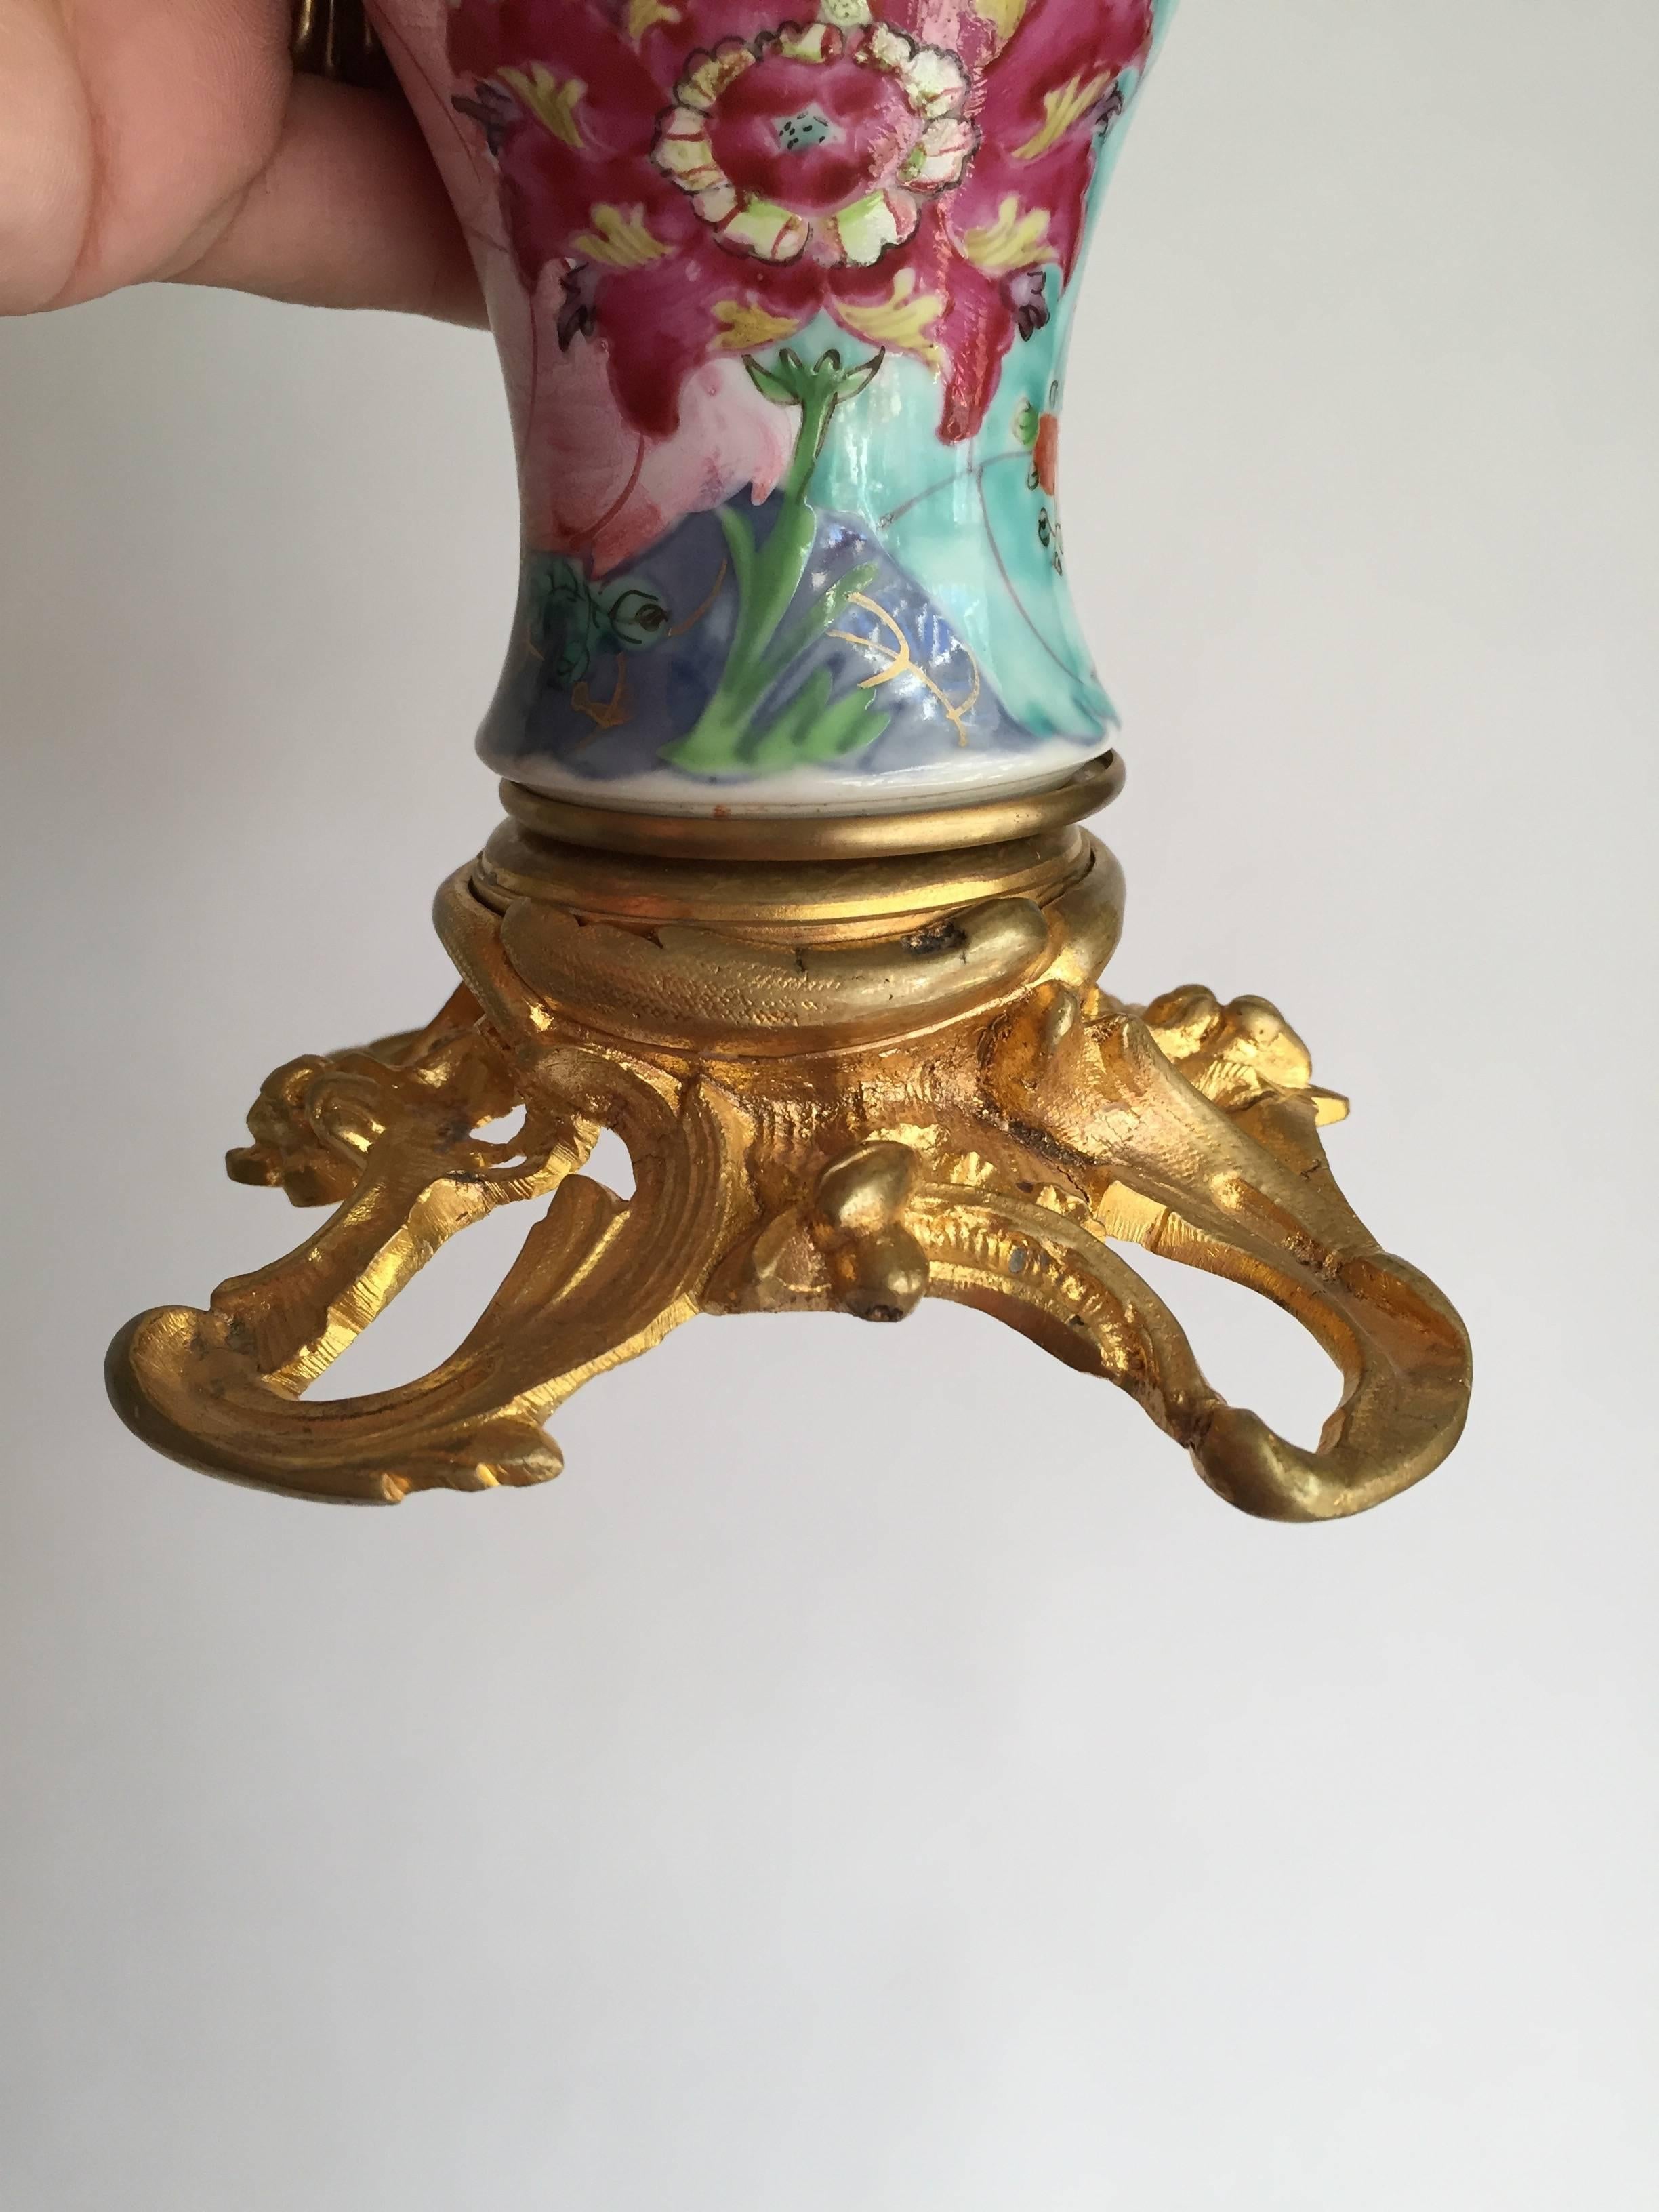 18th Century Chinese Export Porcelain and Ormolu-Mounted Two-Arm Candelabra For Sale